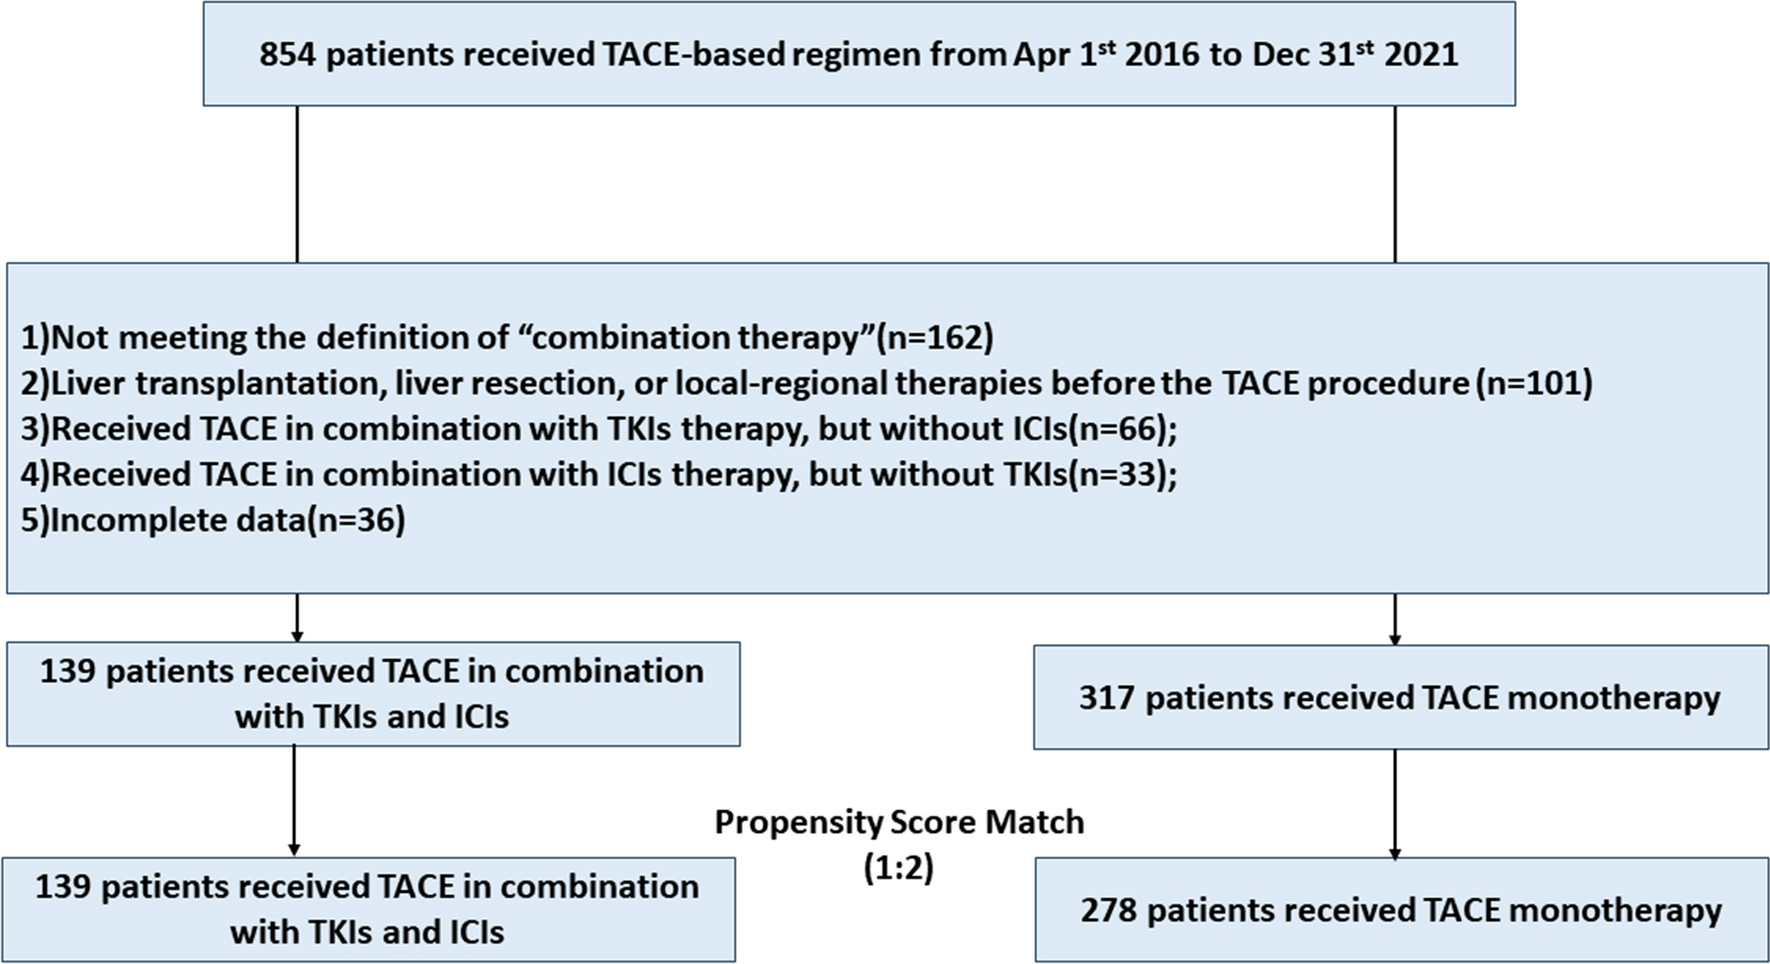 Transarterial chemoembolization with/without immune checkpoint inhibitors plus tyrosine kinase inhibitors for unresectable hepatocellular carcinoma: a single center, propensity score matching real-world study